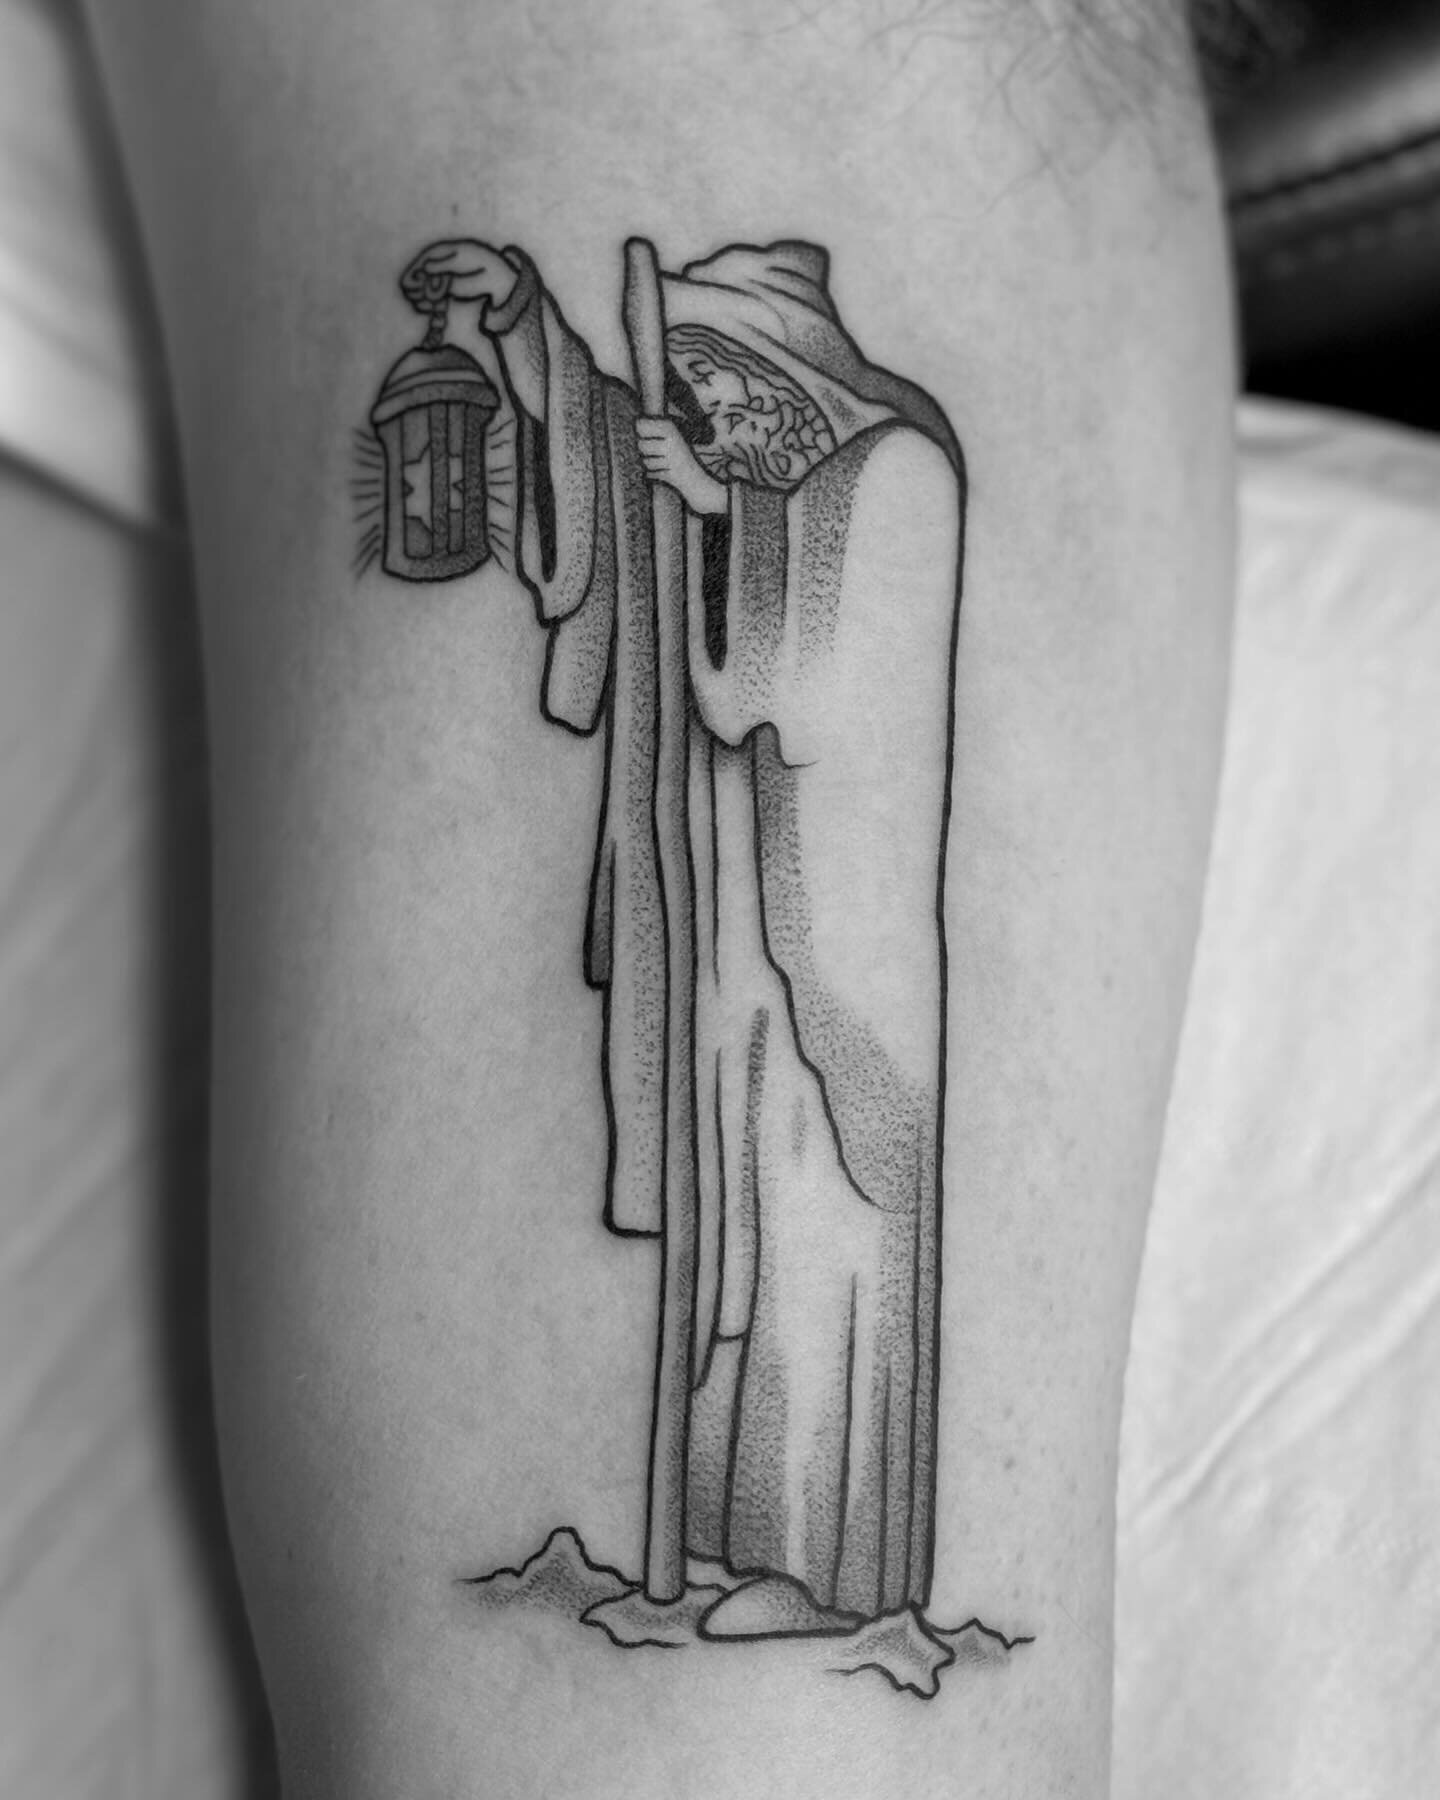 Such a pleasure to have @readtheplants in for this piece based on &lsquo;The Hermit&rsquo; Tarot Card. Quite a spicy spot but Ben did perfectly ✌️
.
.
.
#dotwork #dotworktattoo #fineline #blxckwork #tattooideas #tattooidea #tattooart #tarot #tarotcar